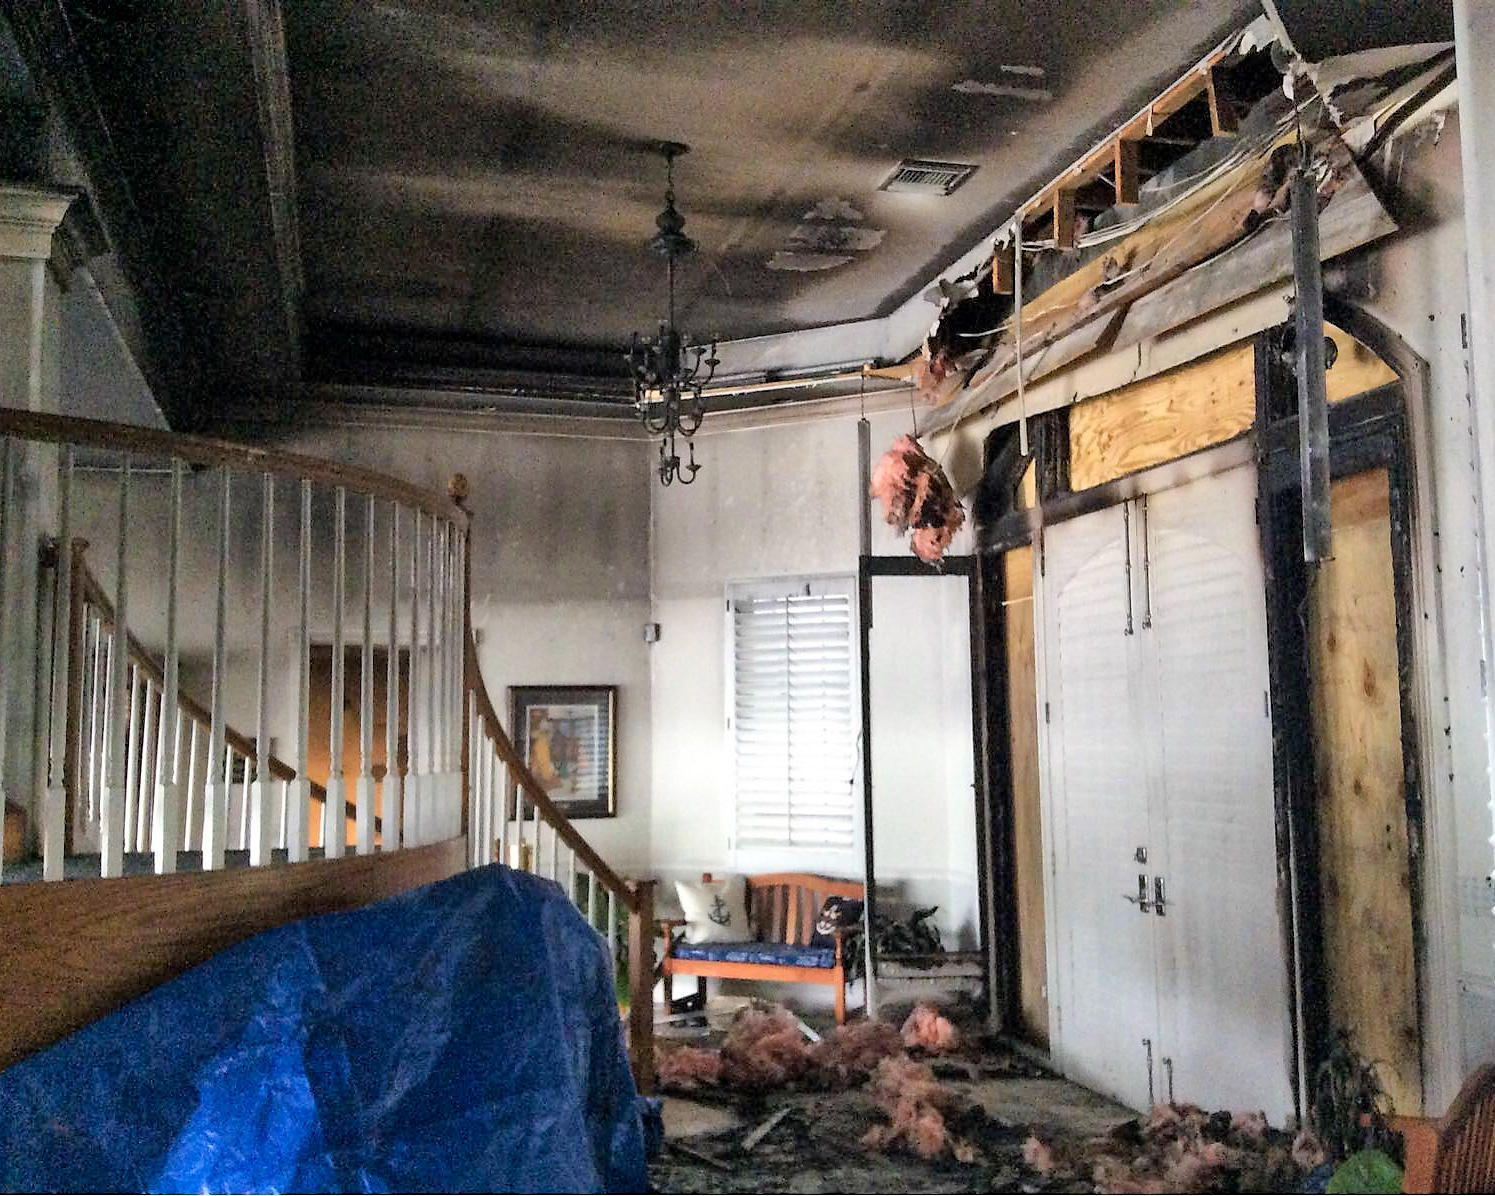 Our SERVPRO of Delray Beach team is committed to help Delray Beach owners and property managers after their fire damage emergencies.